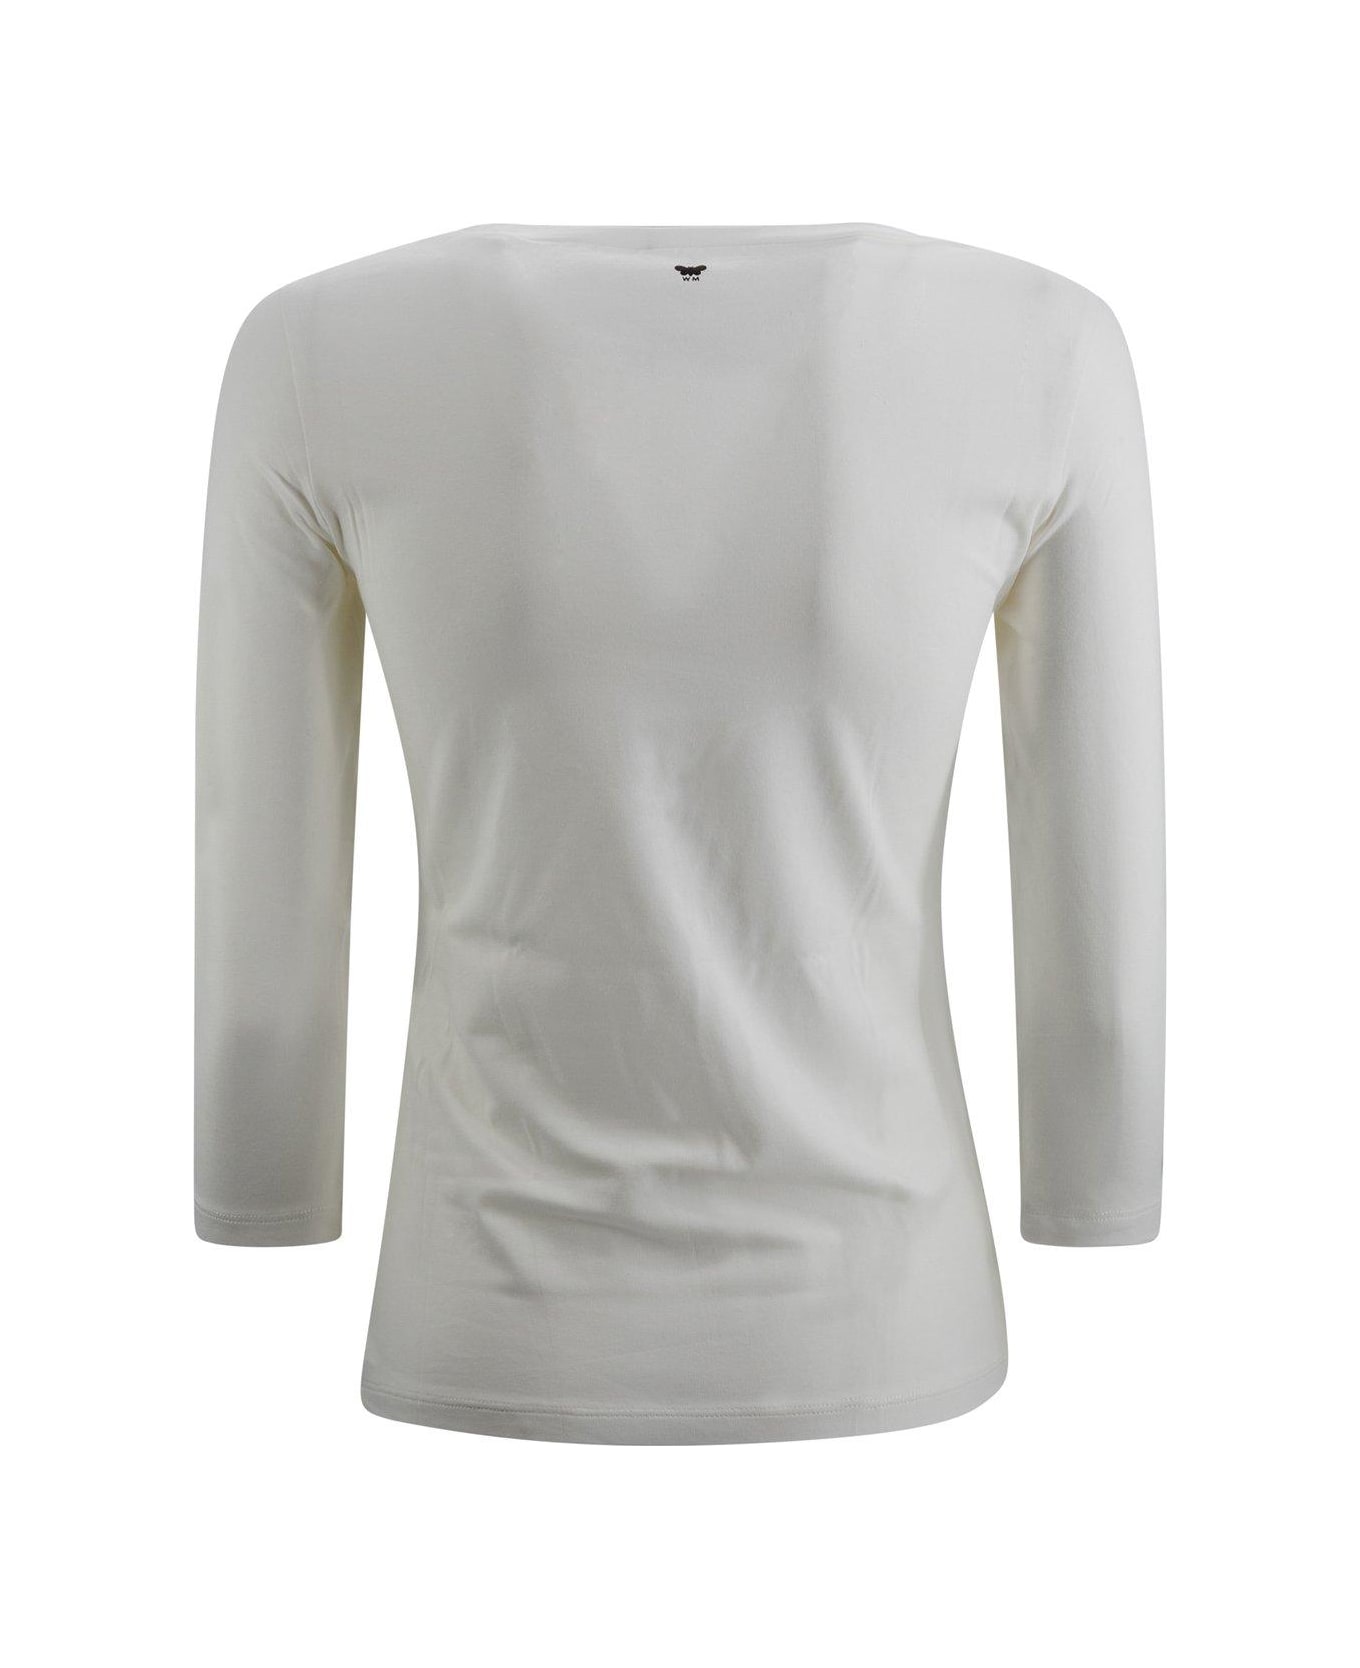 Weekend Max Mara Stretched Jersey T-shirt - WHITE